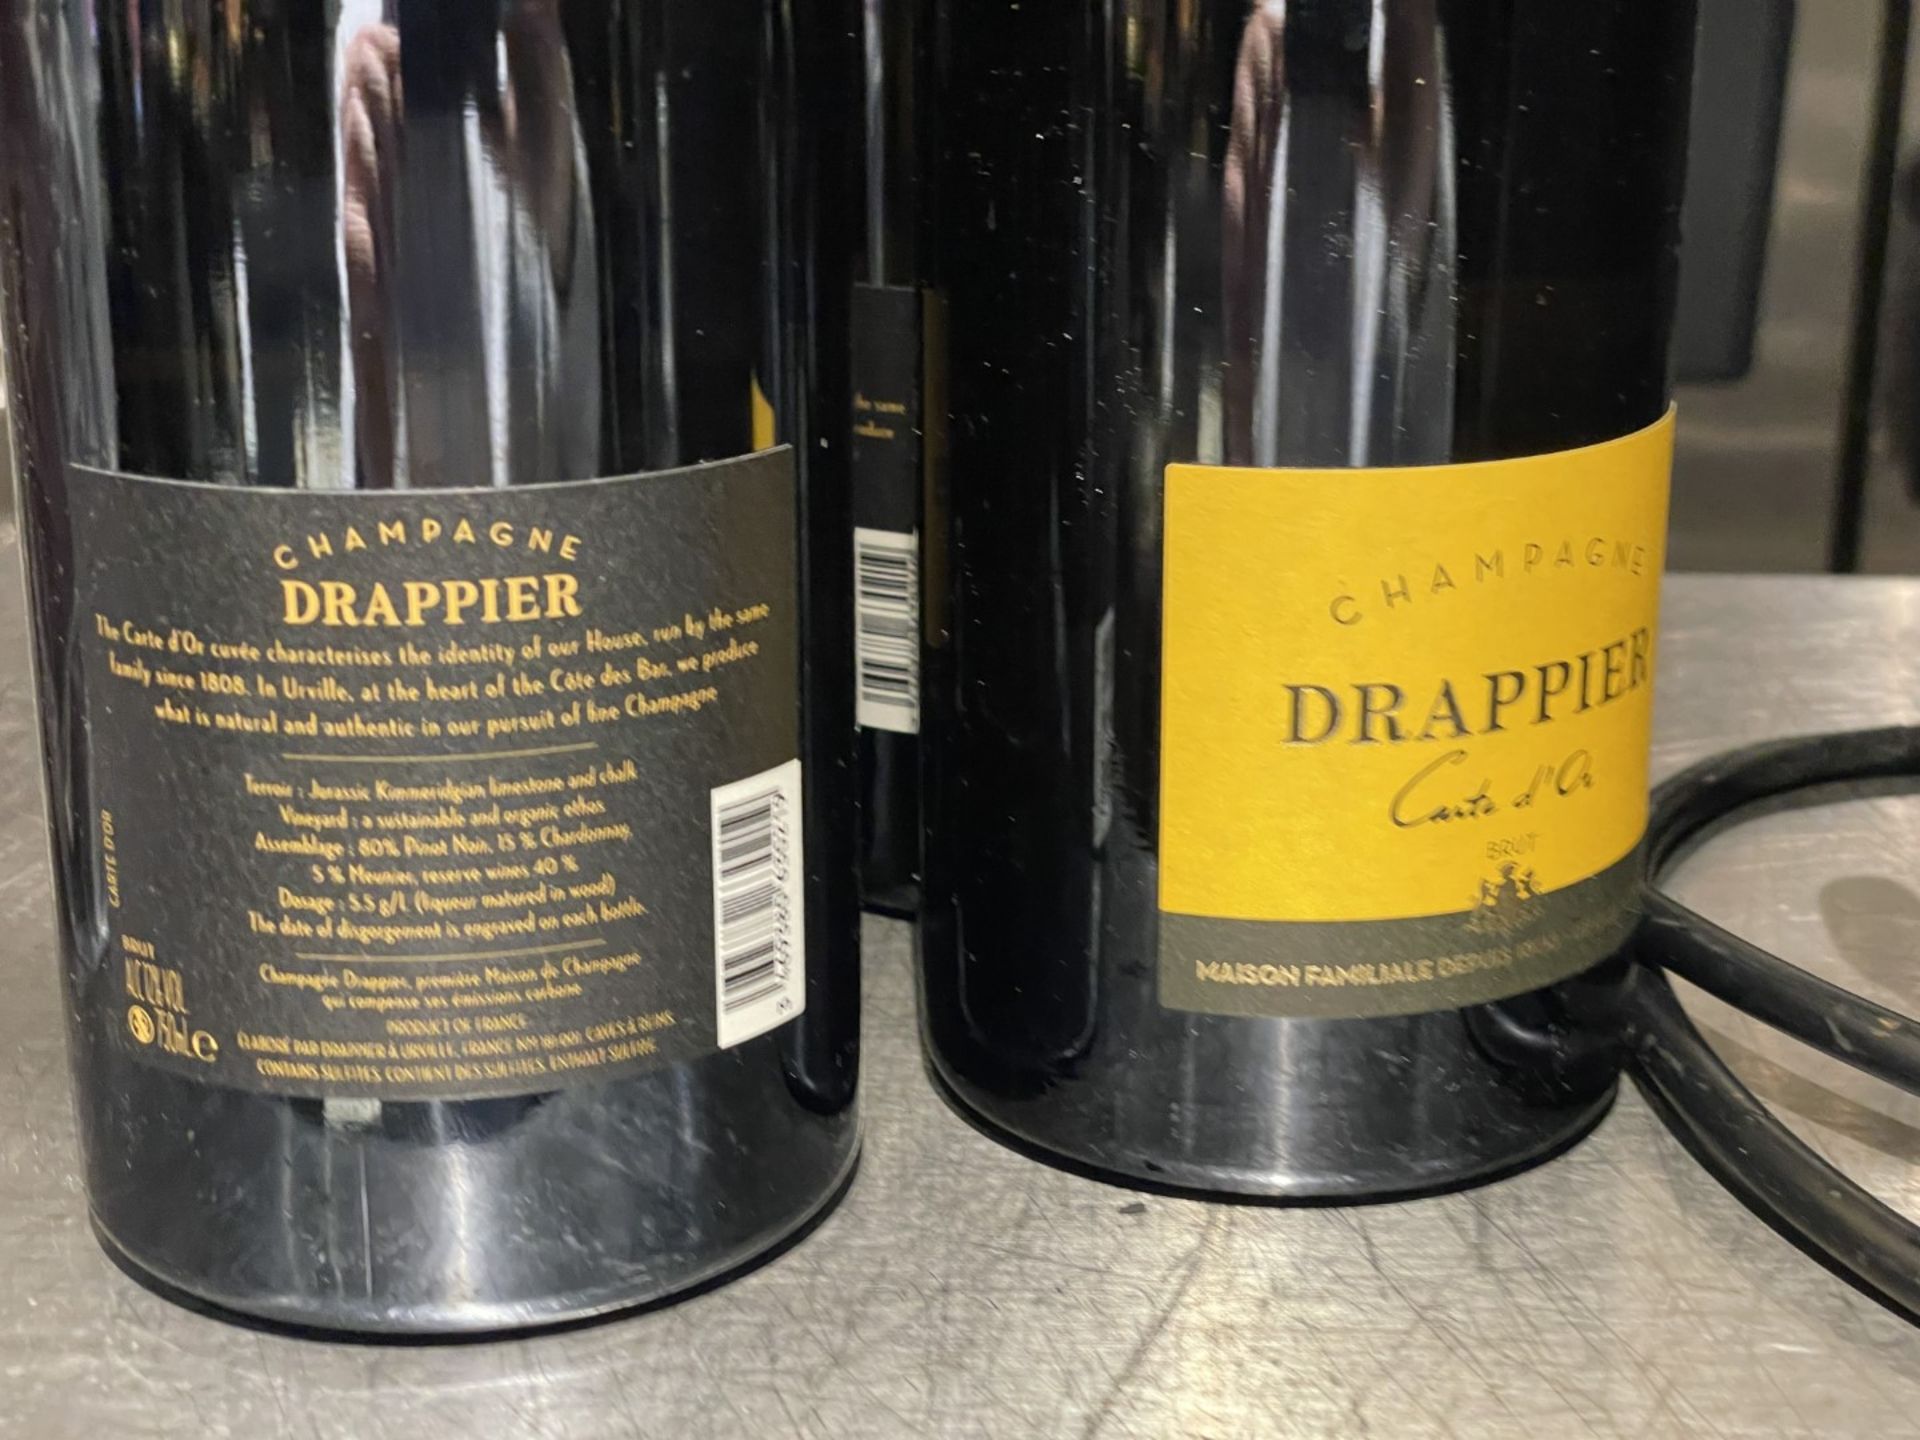 3 x Bottles of 750ml Drappier Champagne - New Unopened Bottles - Image 7 of 9